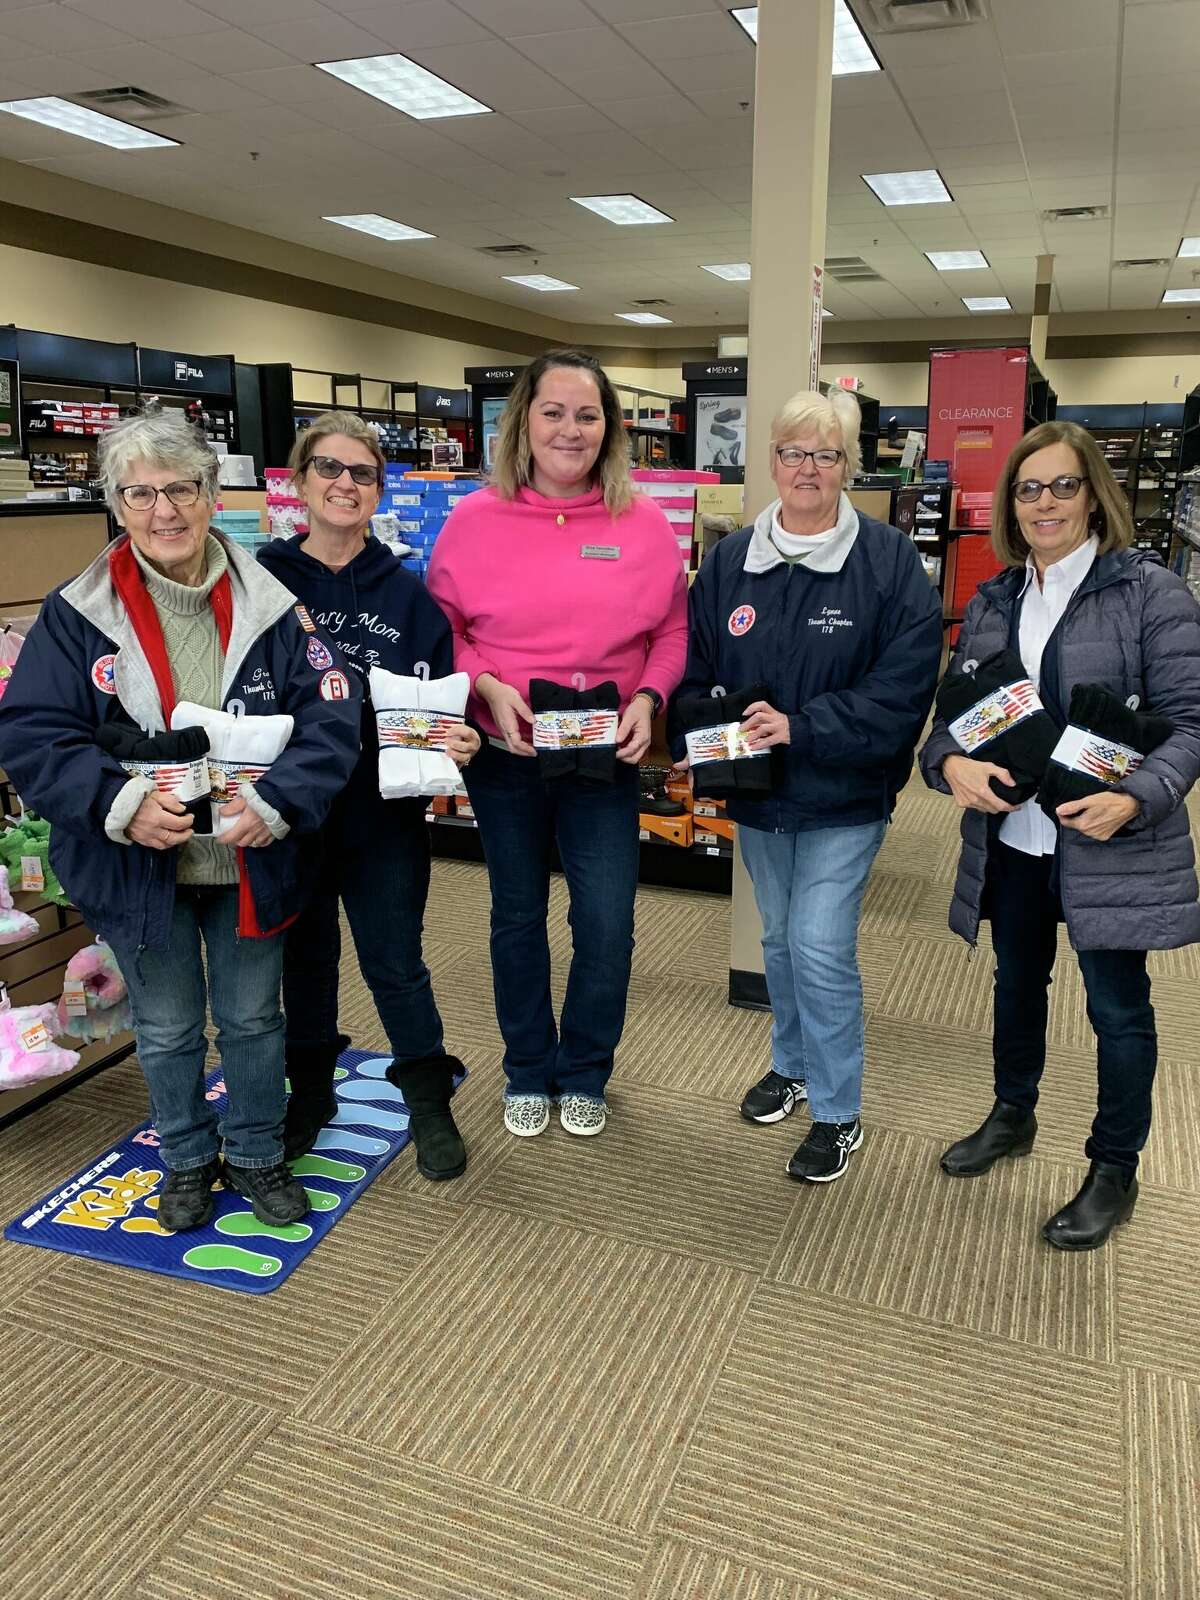 Blue Star Mothers Thumb Chapter MI 178 would like to thank our generous community who purchased and donated 258 pairs of socks while they shopped at Shoe Sensation in Bad Axe. Thank you to Shoe Sensation for sponsoring this event. We will be able to send our troops extra socks in their care packages and also be able to give to our local veterans who are in need. Pictured are BSM Grace Rosenthal, BSM Marcia Janik, Store Associate Megan Walker, BSM Lynne Tschirhart, BSM Debbie Decker.